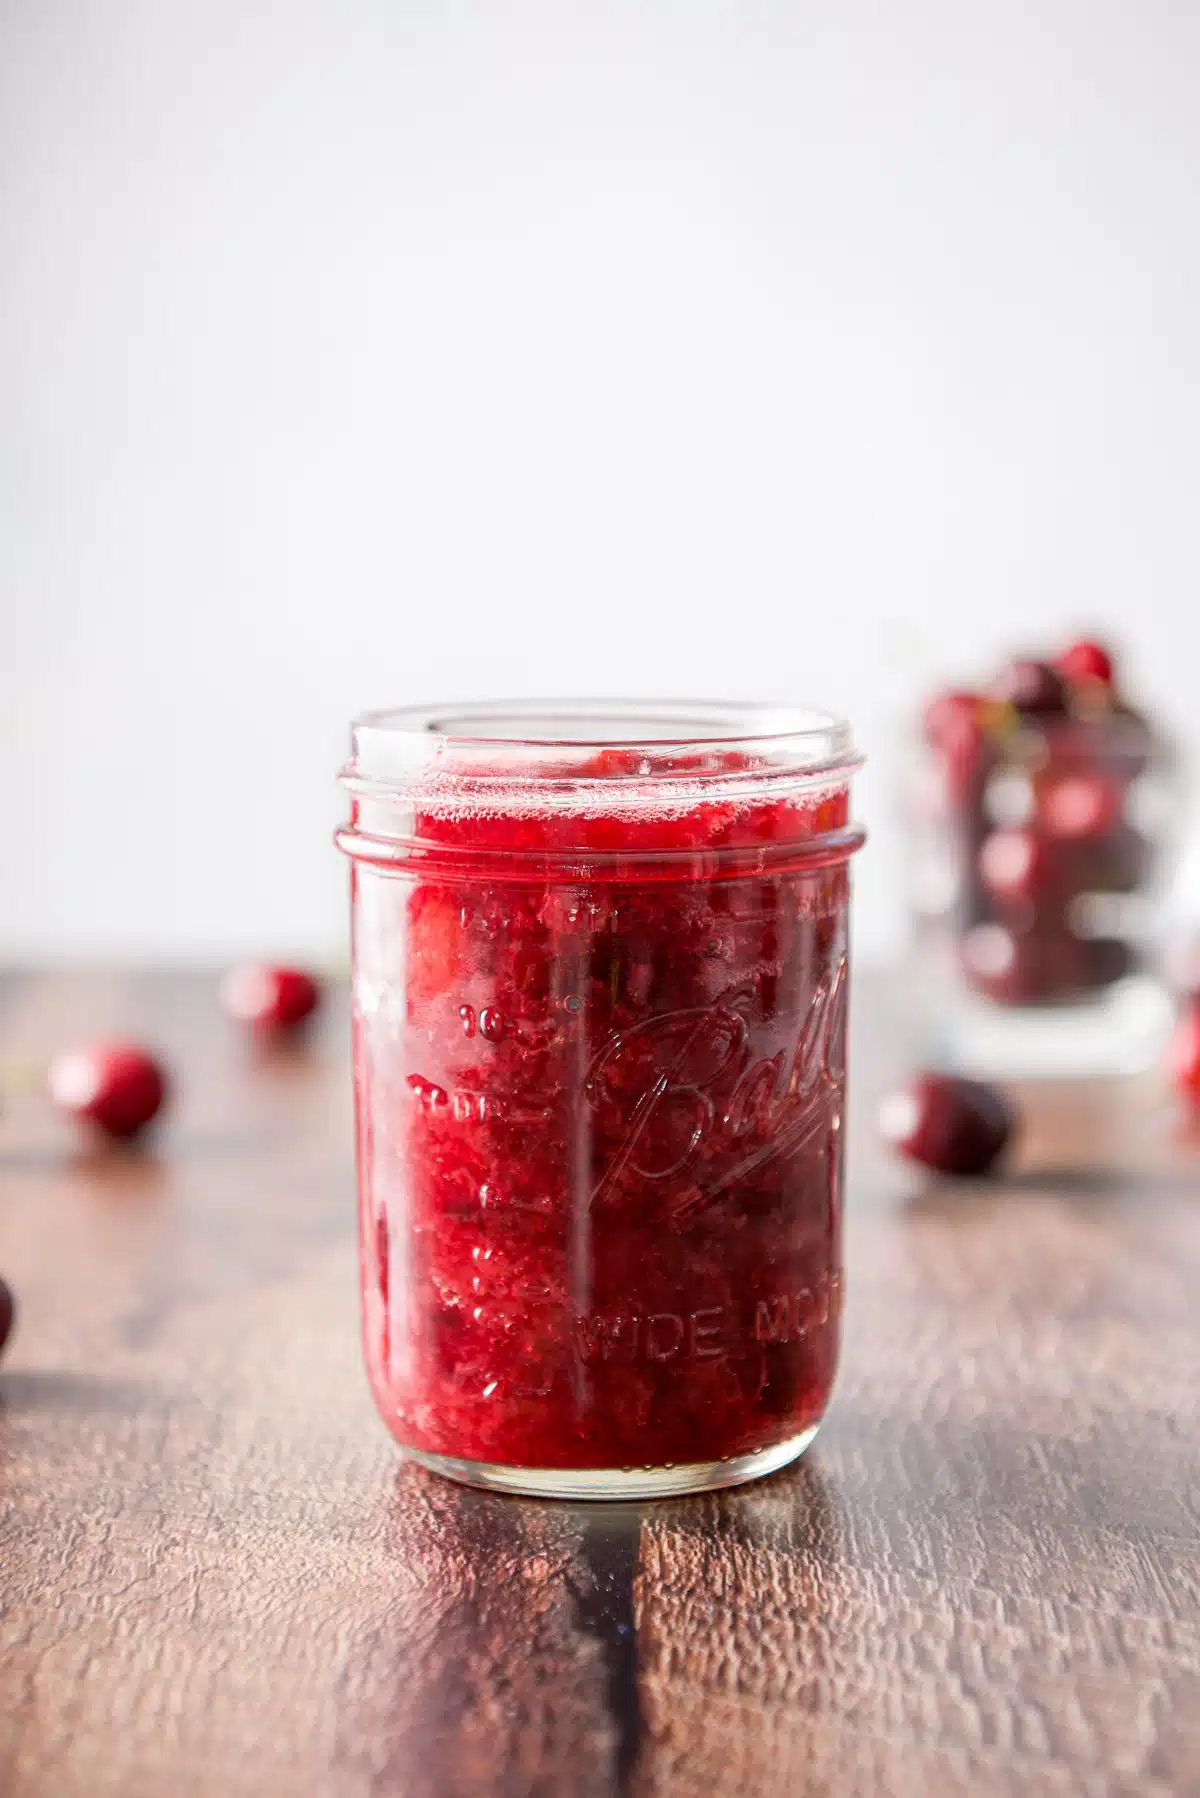 Vertical view of the sauce in a jar with cherries in the background